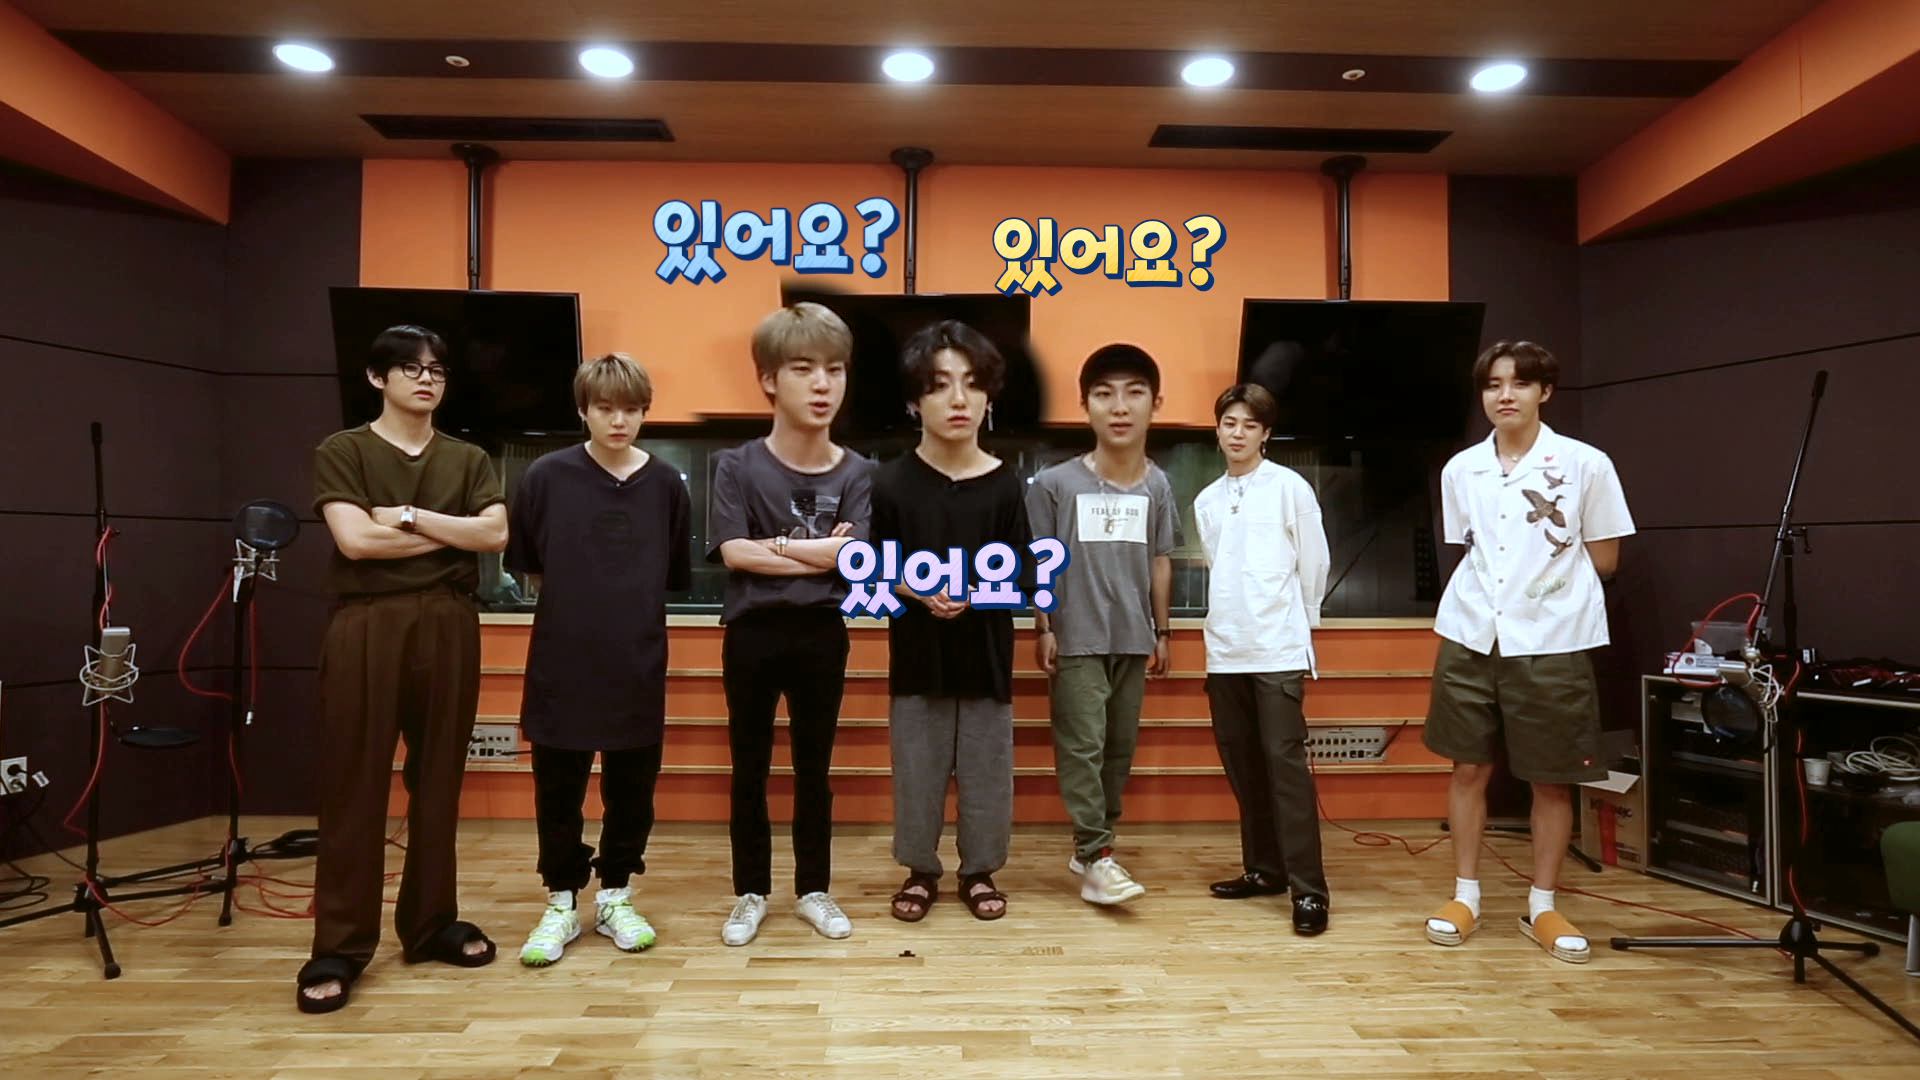 Run BTS: BTS Takes Entertainment to the Next Level on Episode 109 - HubPages